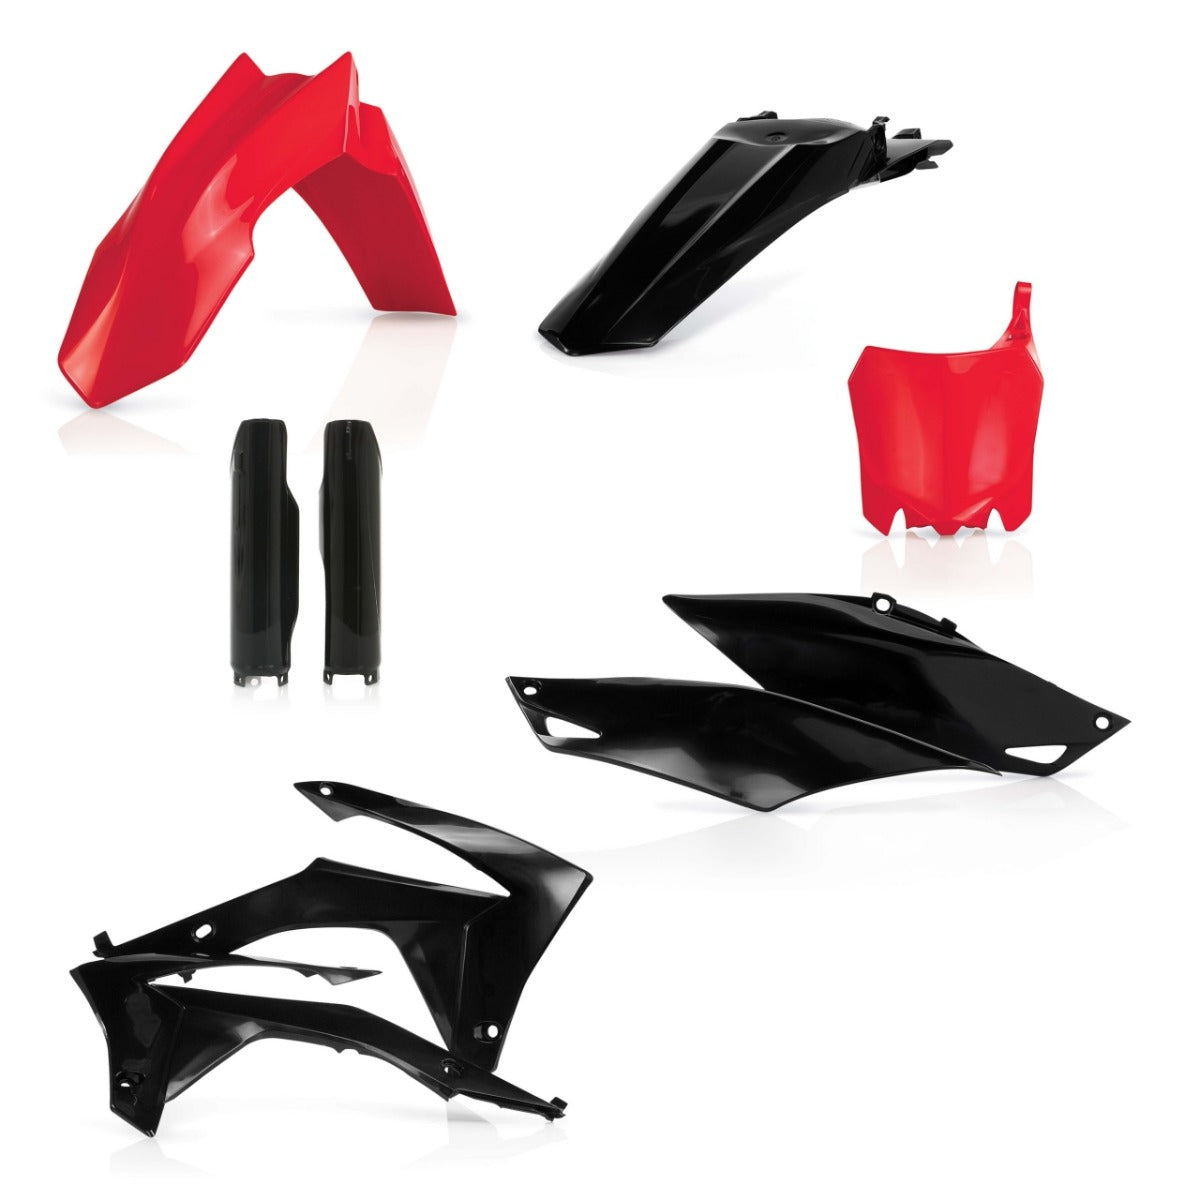 FULL PLASTIC KIT CRF450R 13-16 CRF250R 14-17 (NO AIRBOX COVER)